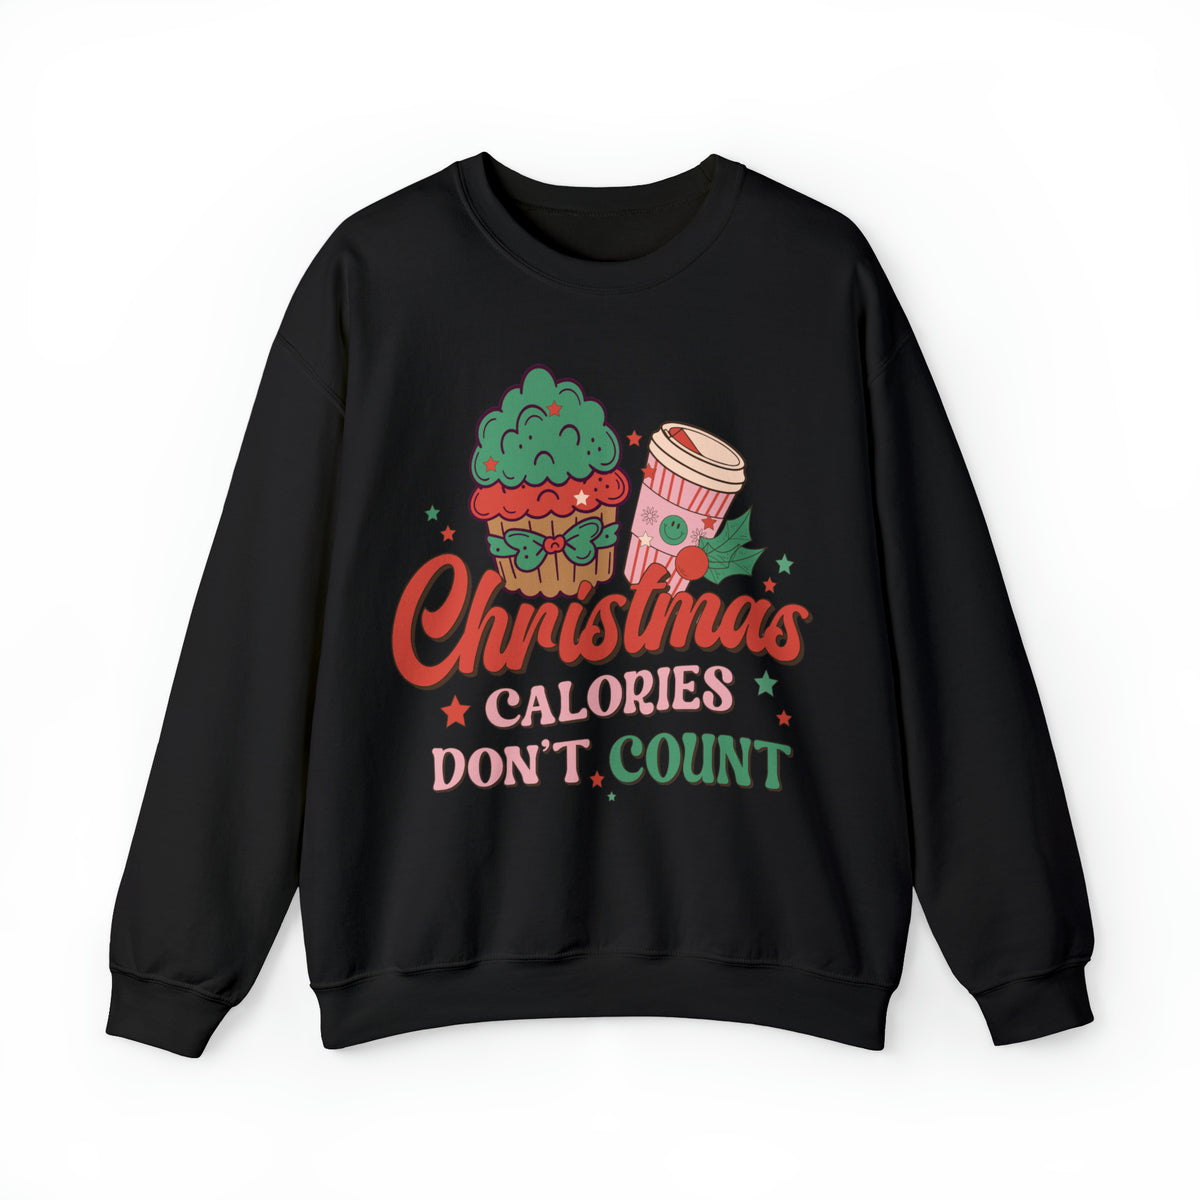 Christmas Sweatshirt, Christmas Sweater, Christmas Party Outfit, Holiday Gifts, Funny Christmas Sweater, Ugly Sweater, Holiday Sweatshirt